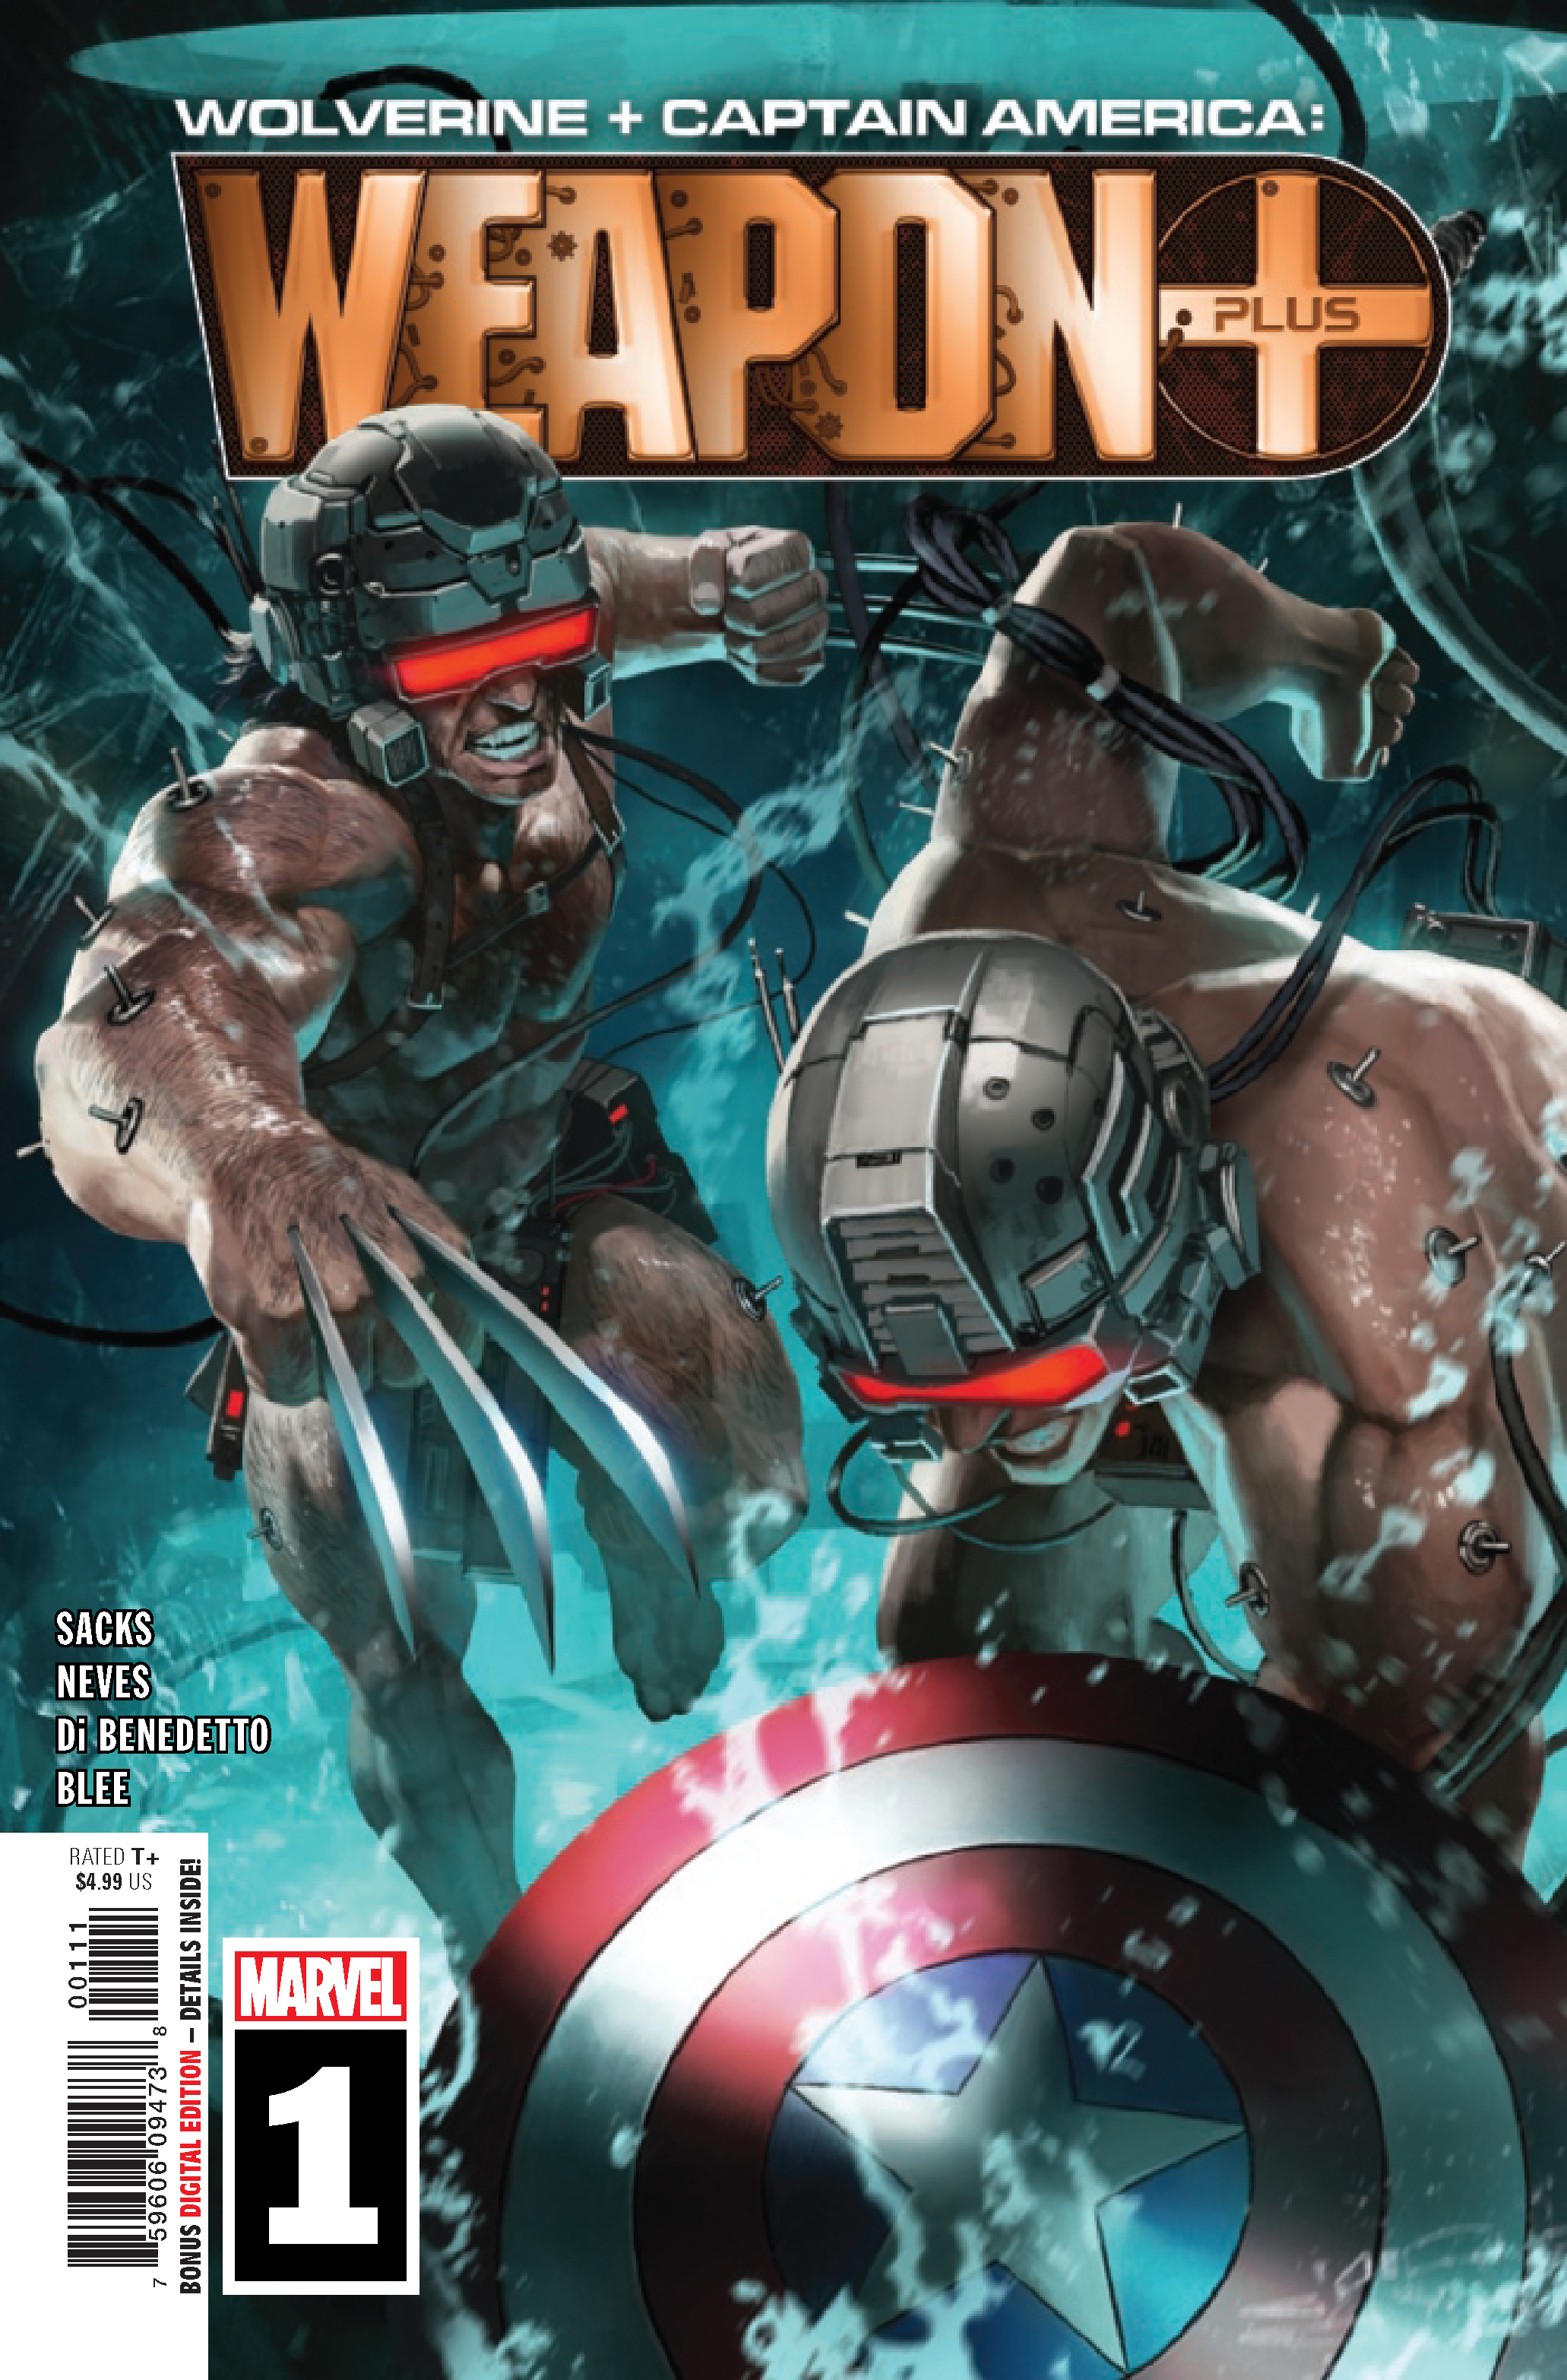 Wolverine and Captain America: Weapon Plus no. 1 (2019 Series)